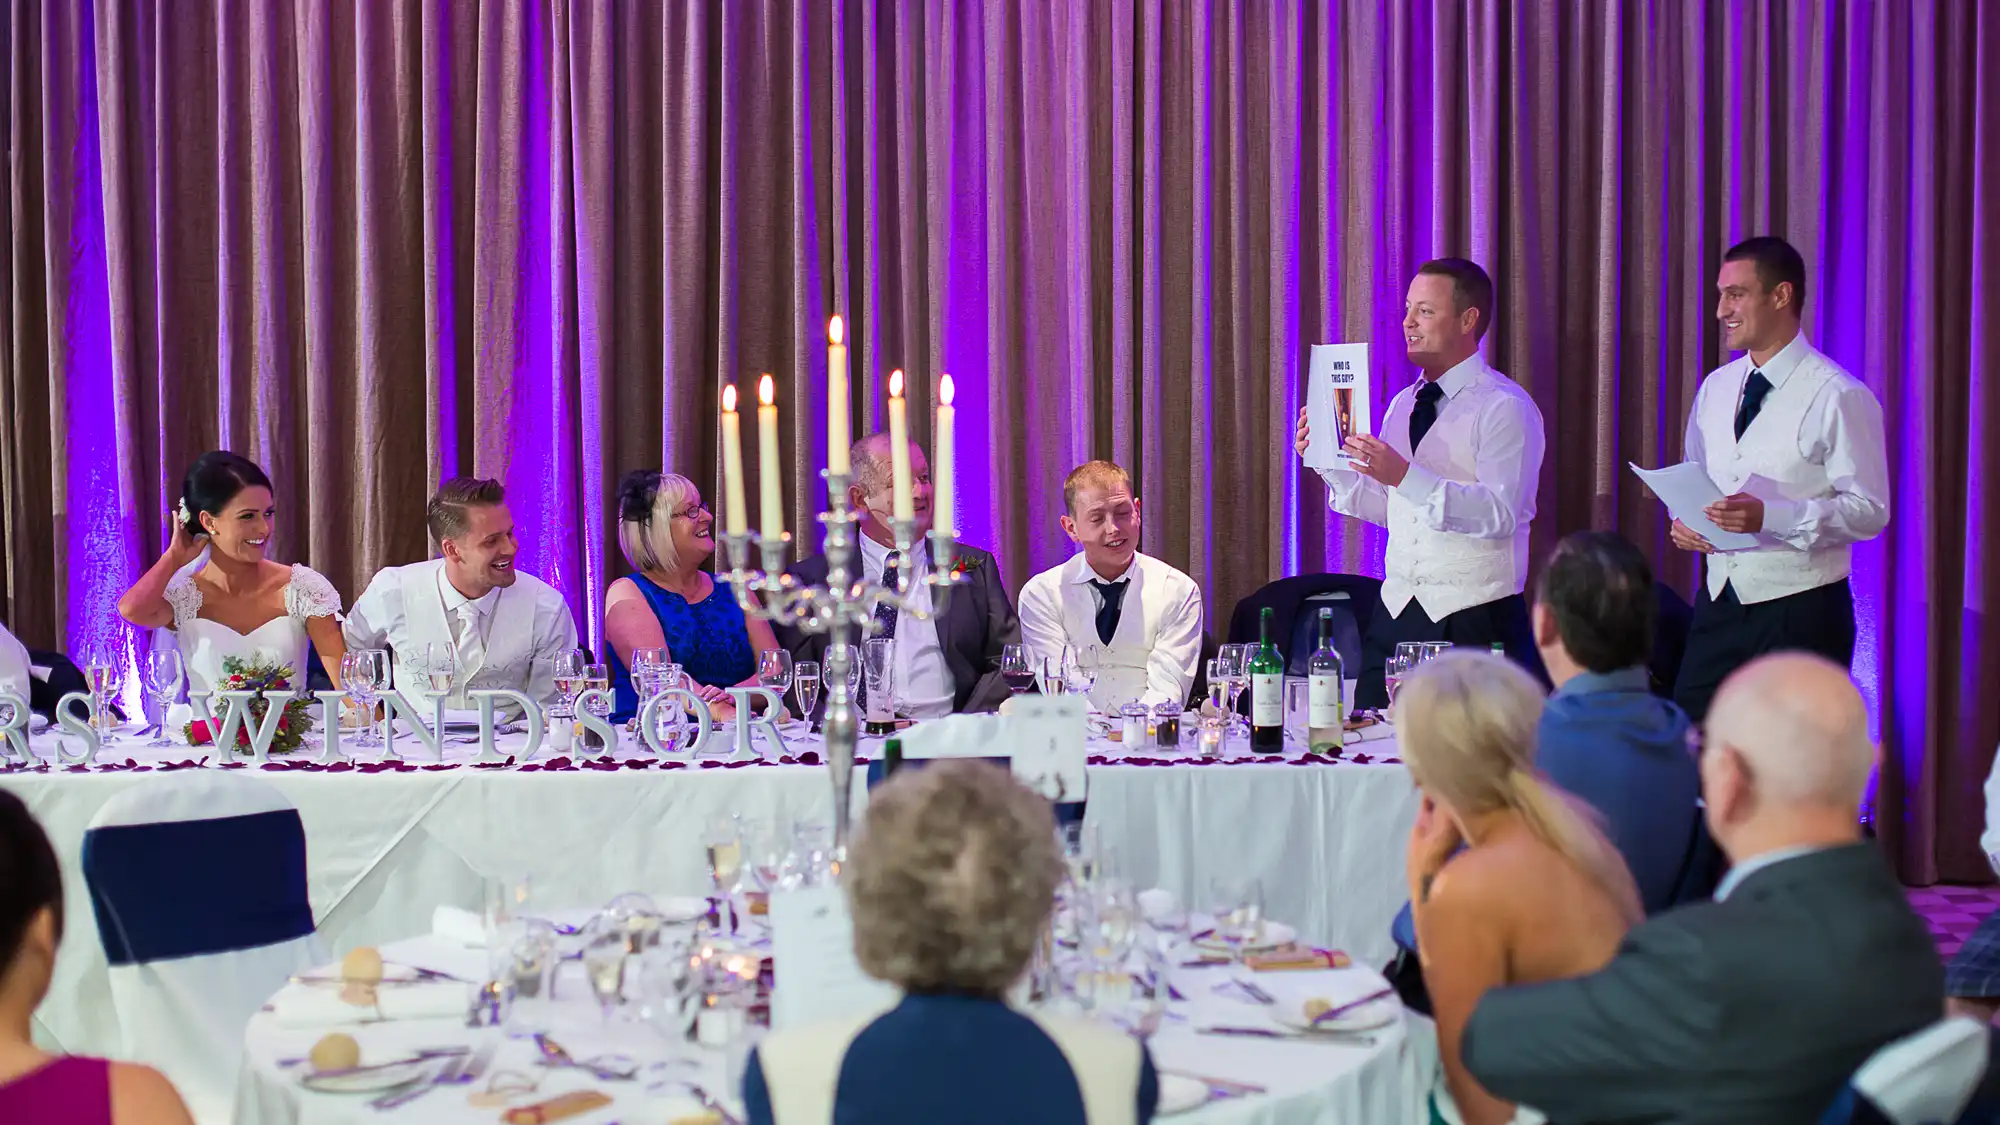 Two men standing and giving a speech at a wedding reception while guests seated around tables listen attentively.